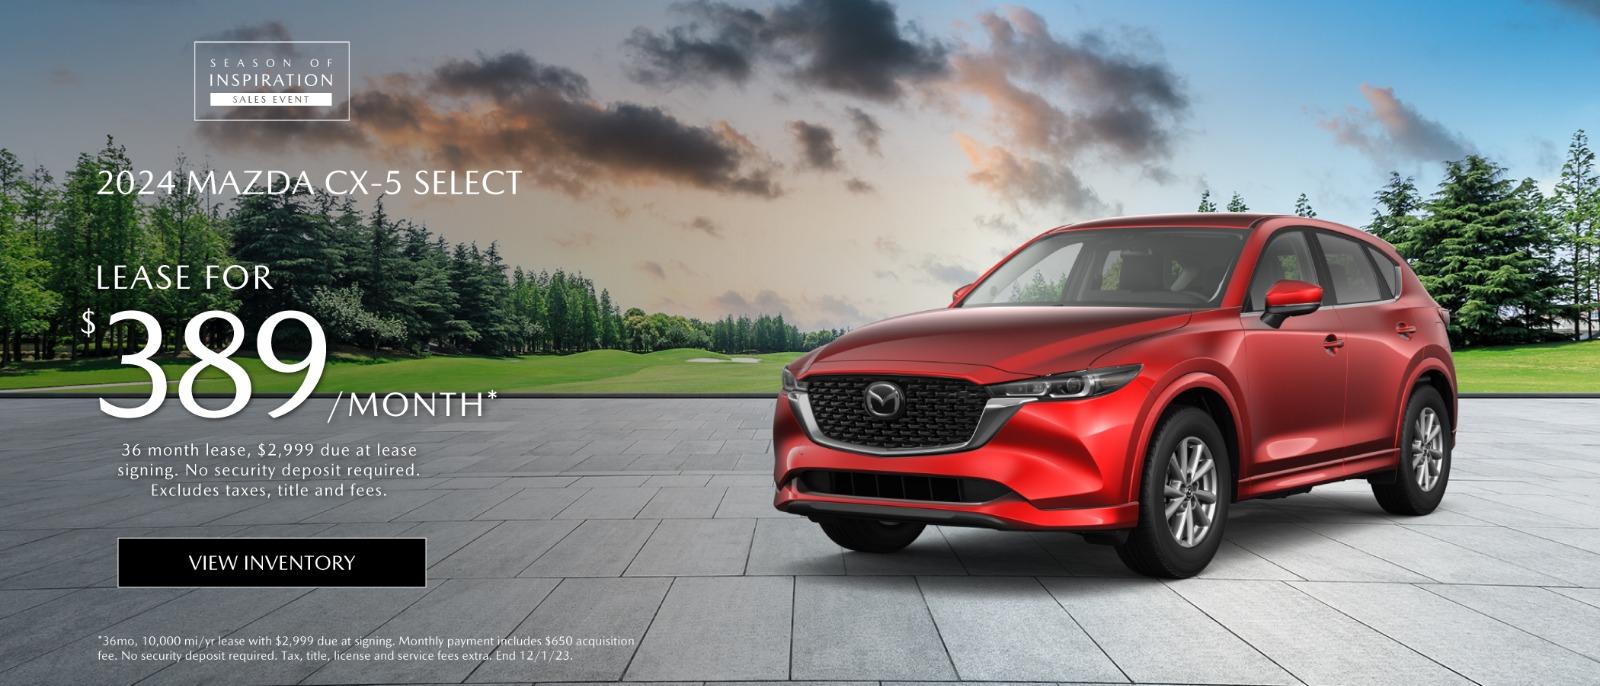 2024 Mazda  CX-5 Select Lease for $389 per month